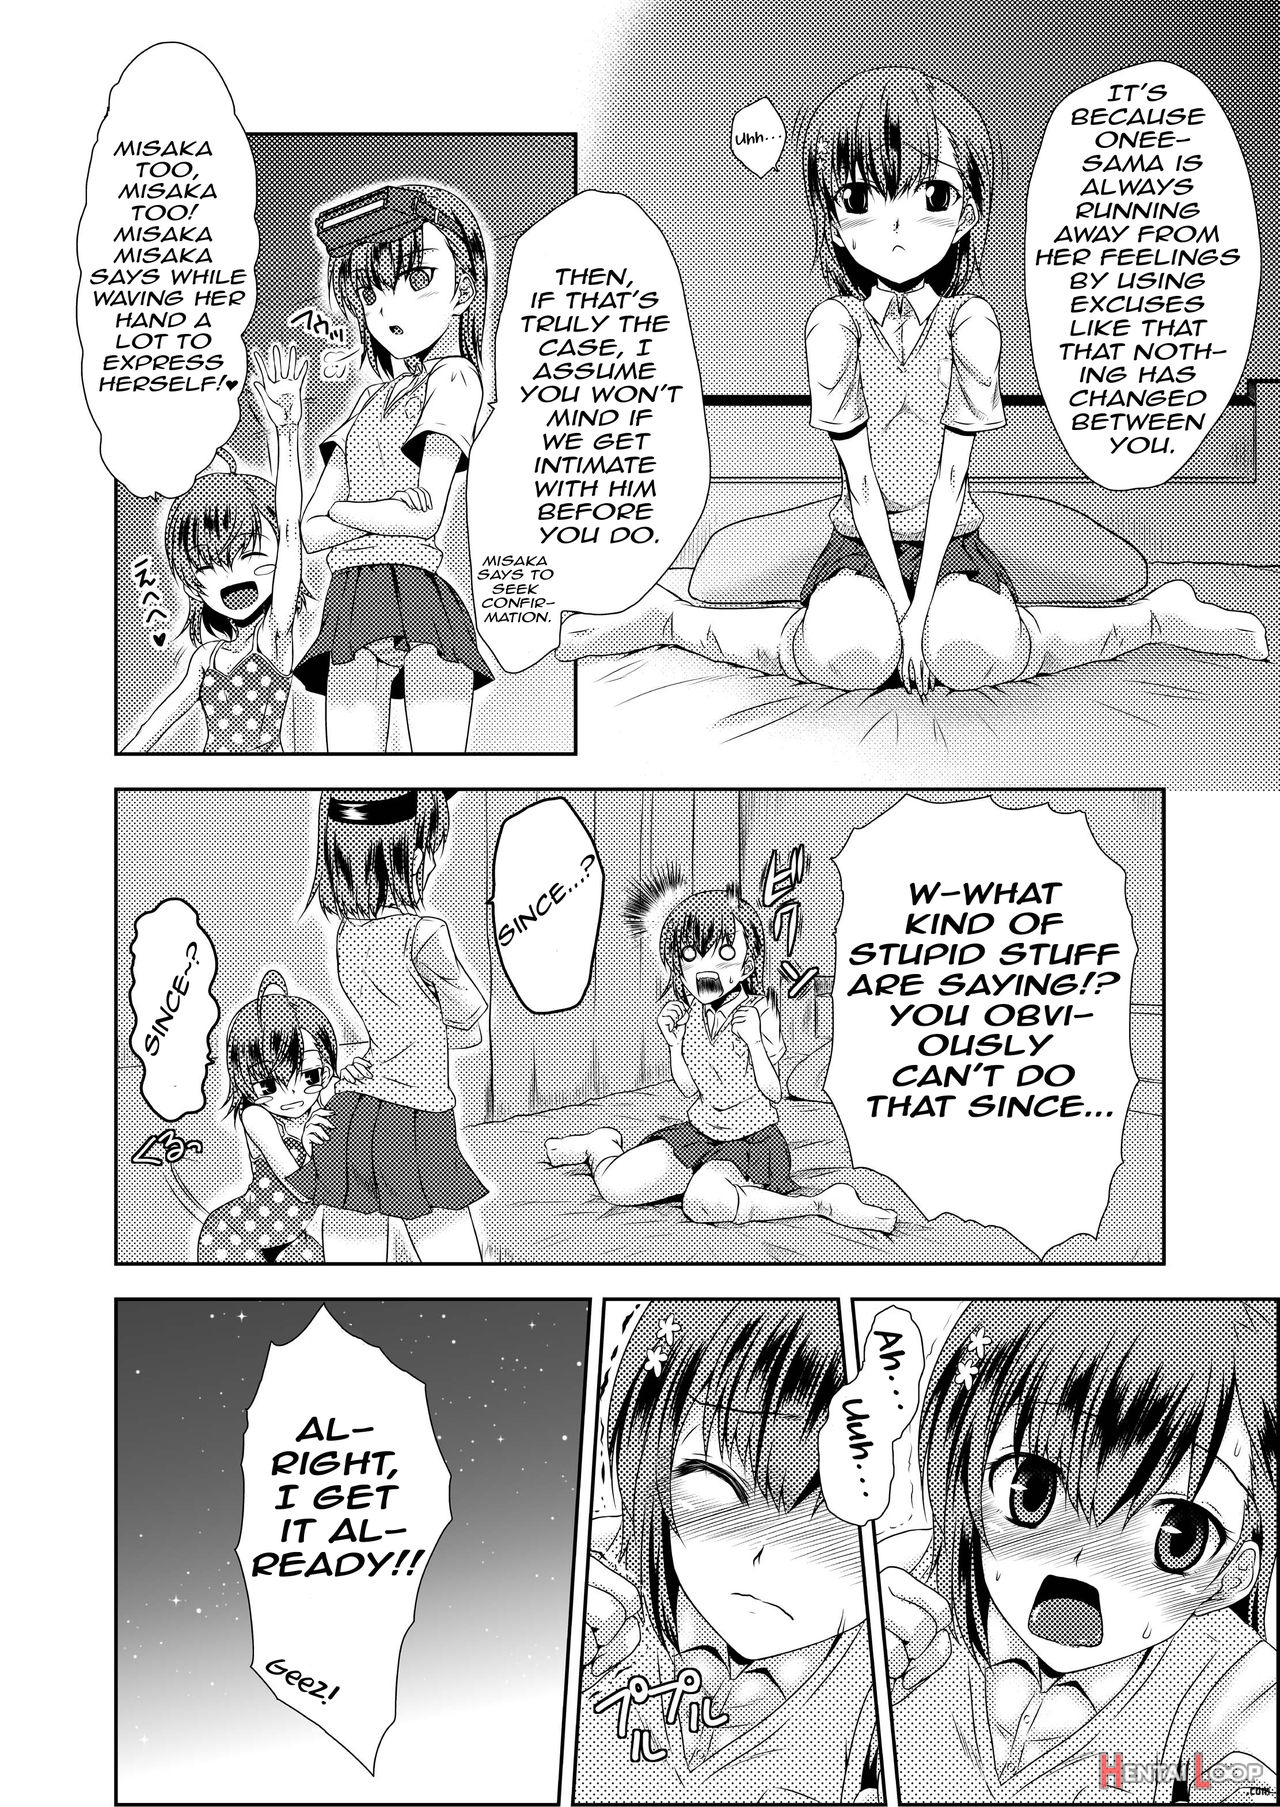 Misaka X3 - To Your Honest Feelings. page 9